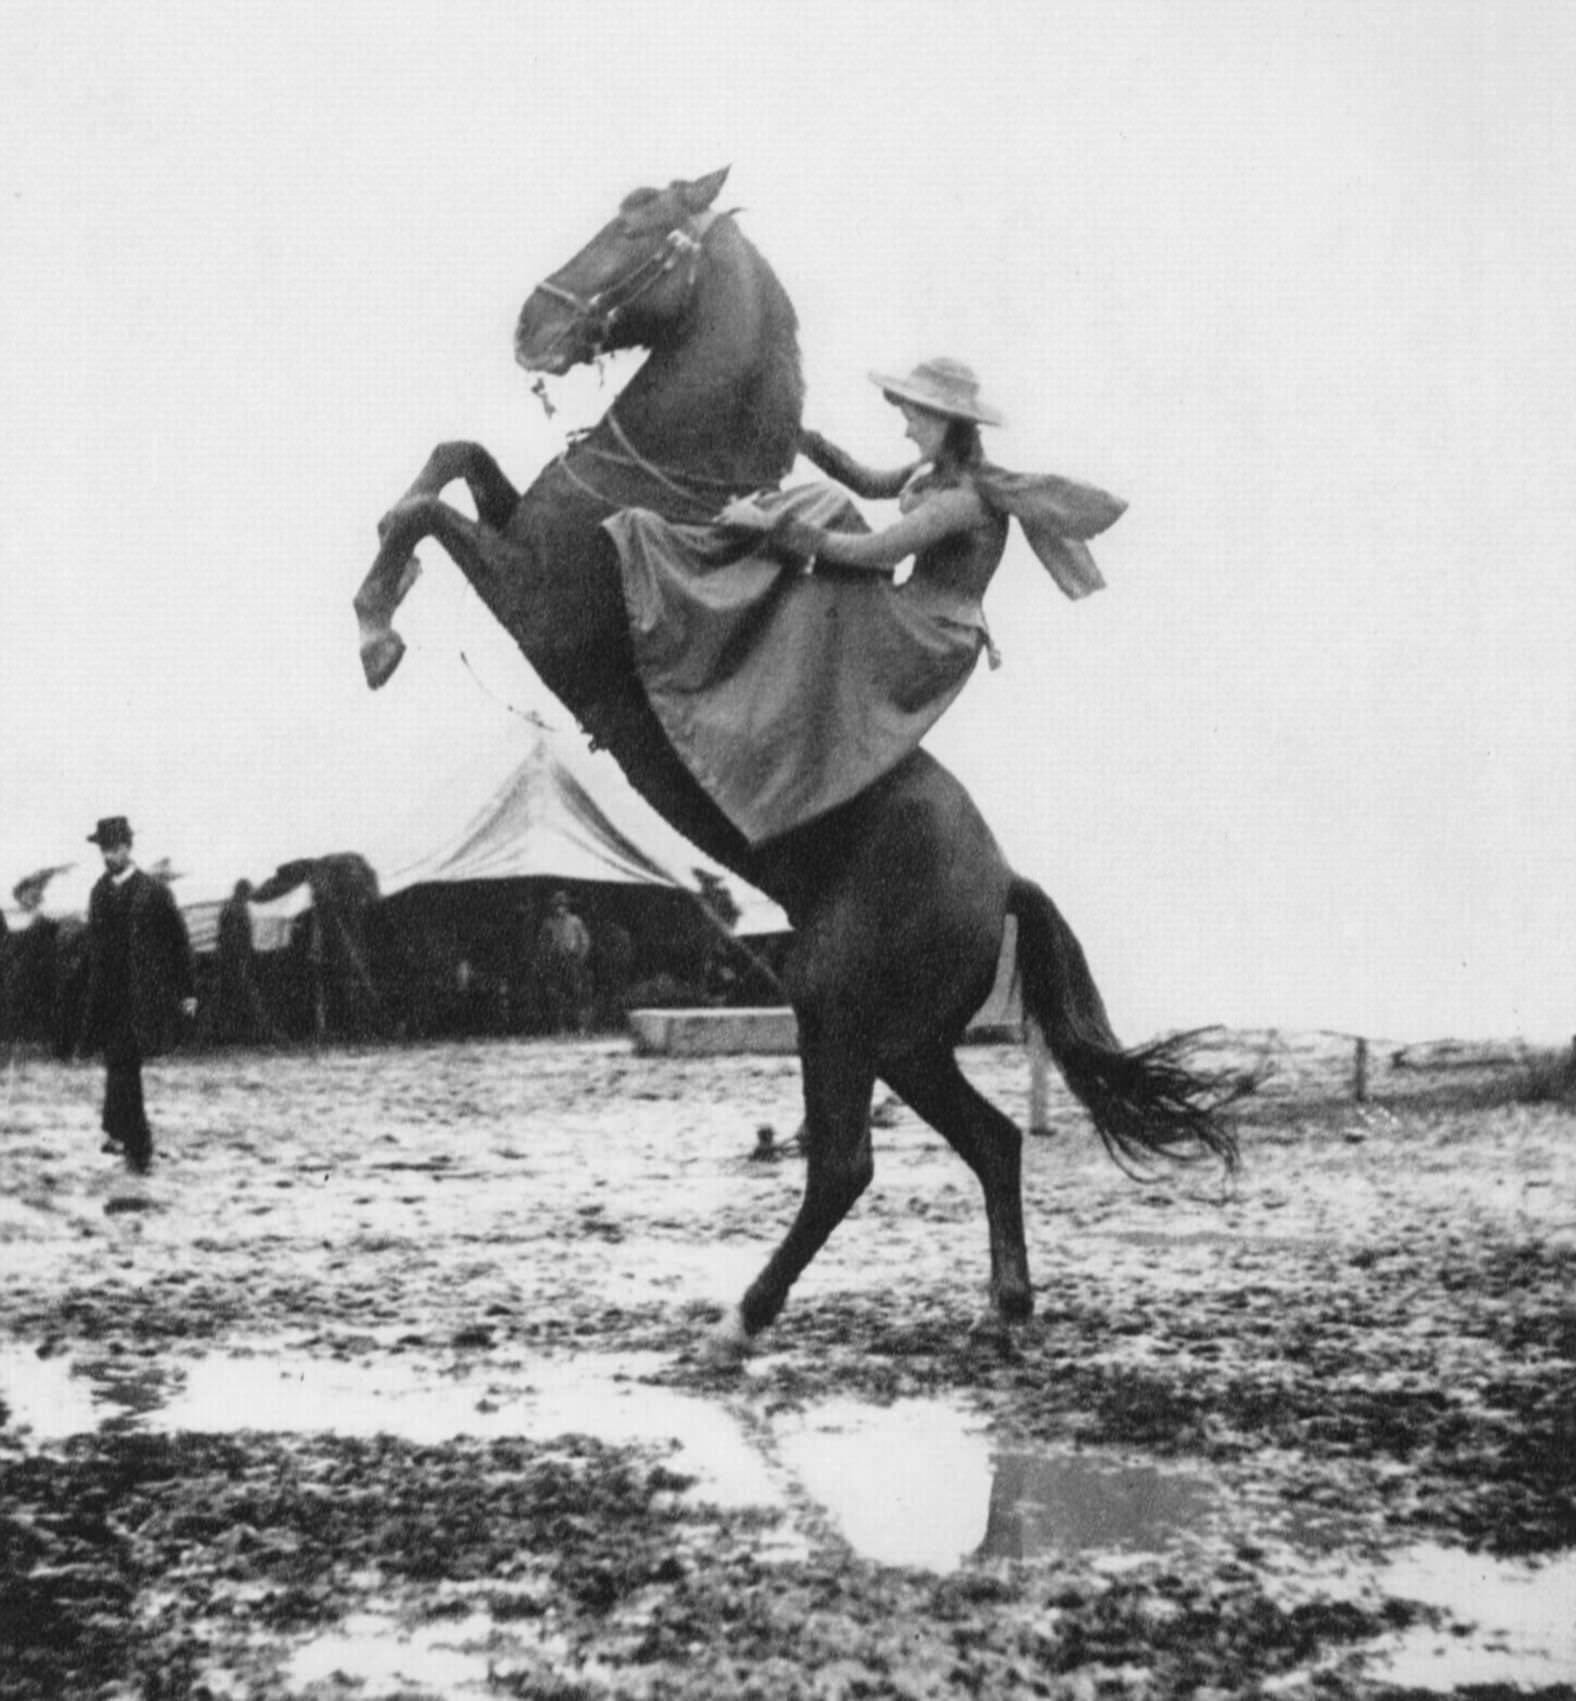 Annie Oakley, famous for her shooting skills, shows off her riding skills in 1890.